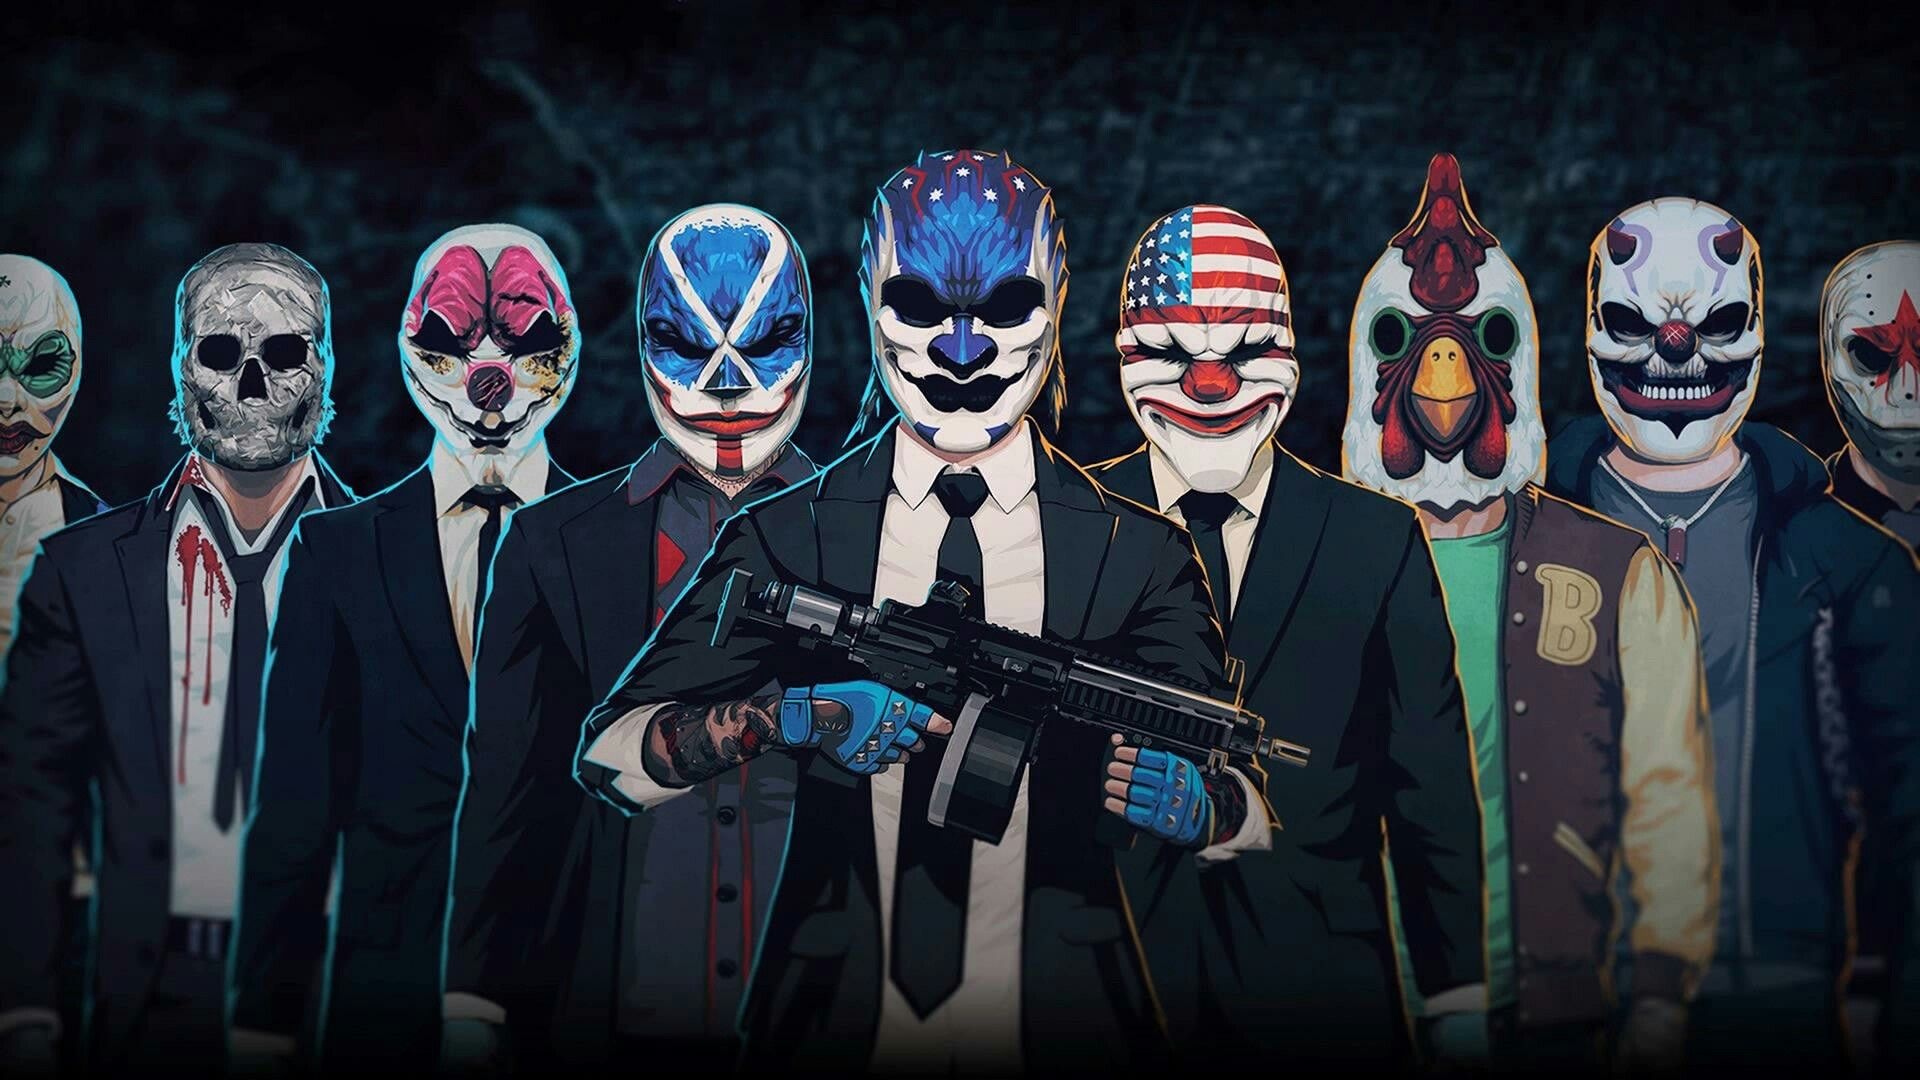 Steam error steam must be running to play this game payday 2 что делать фото 71